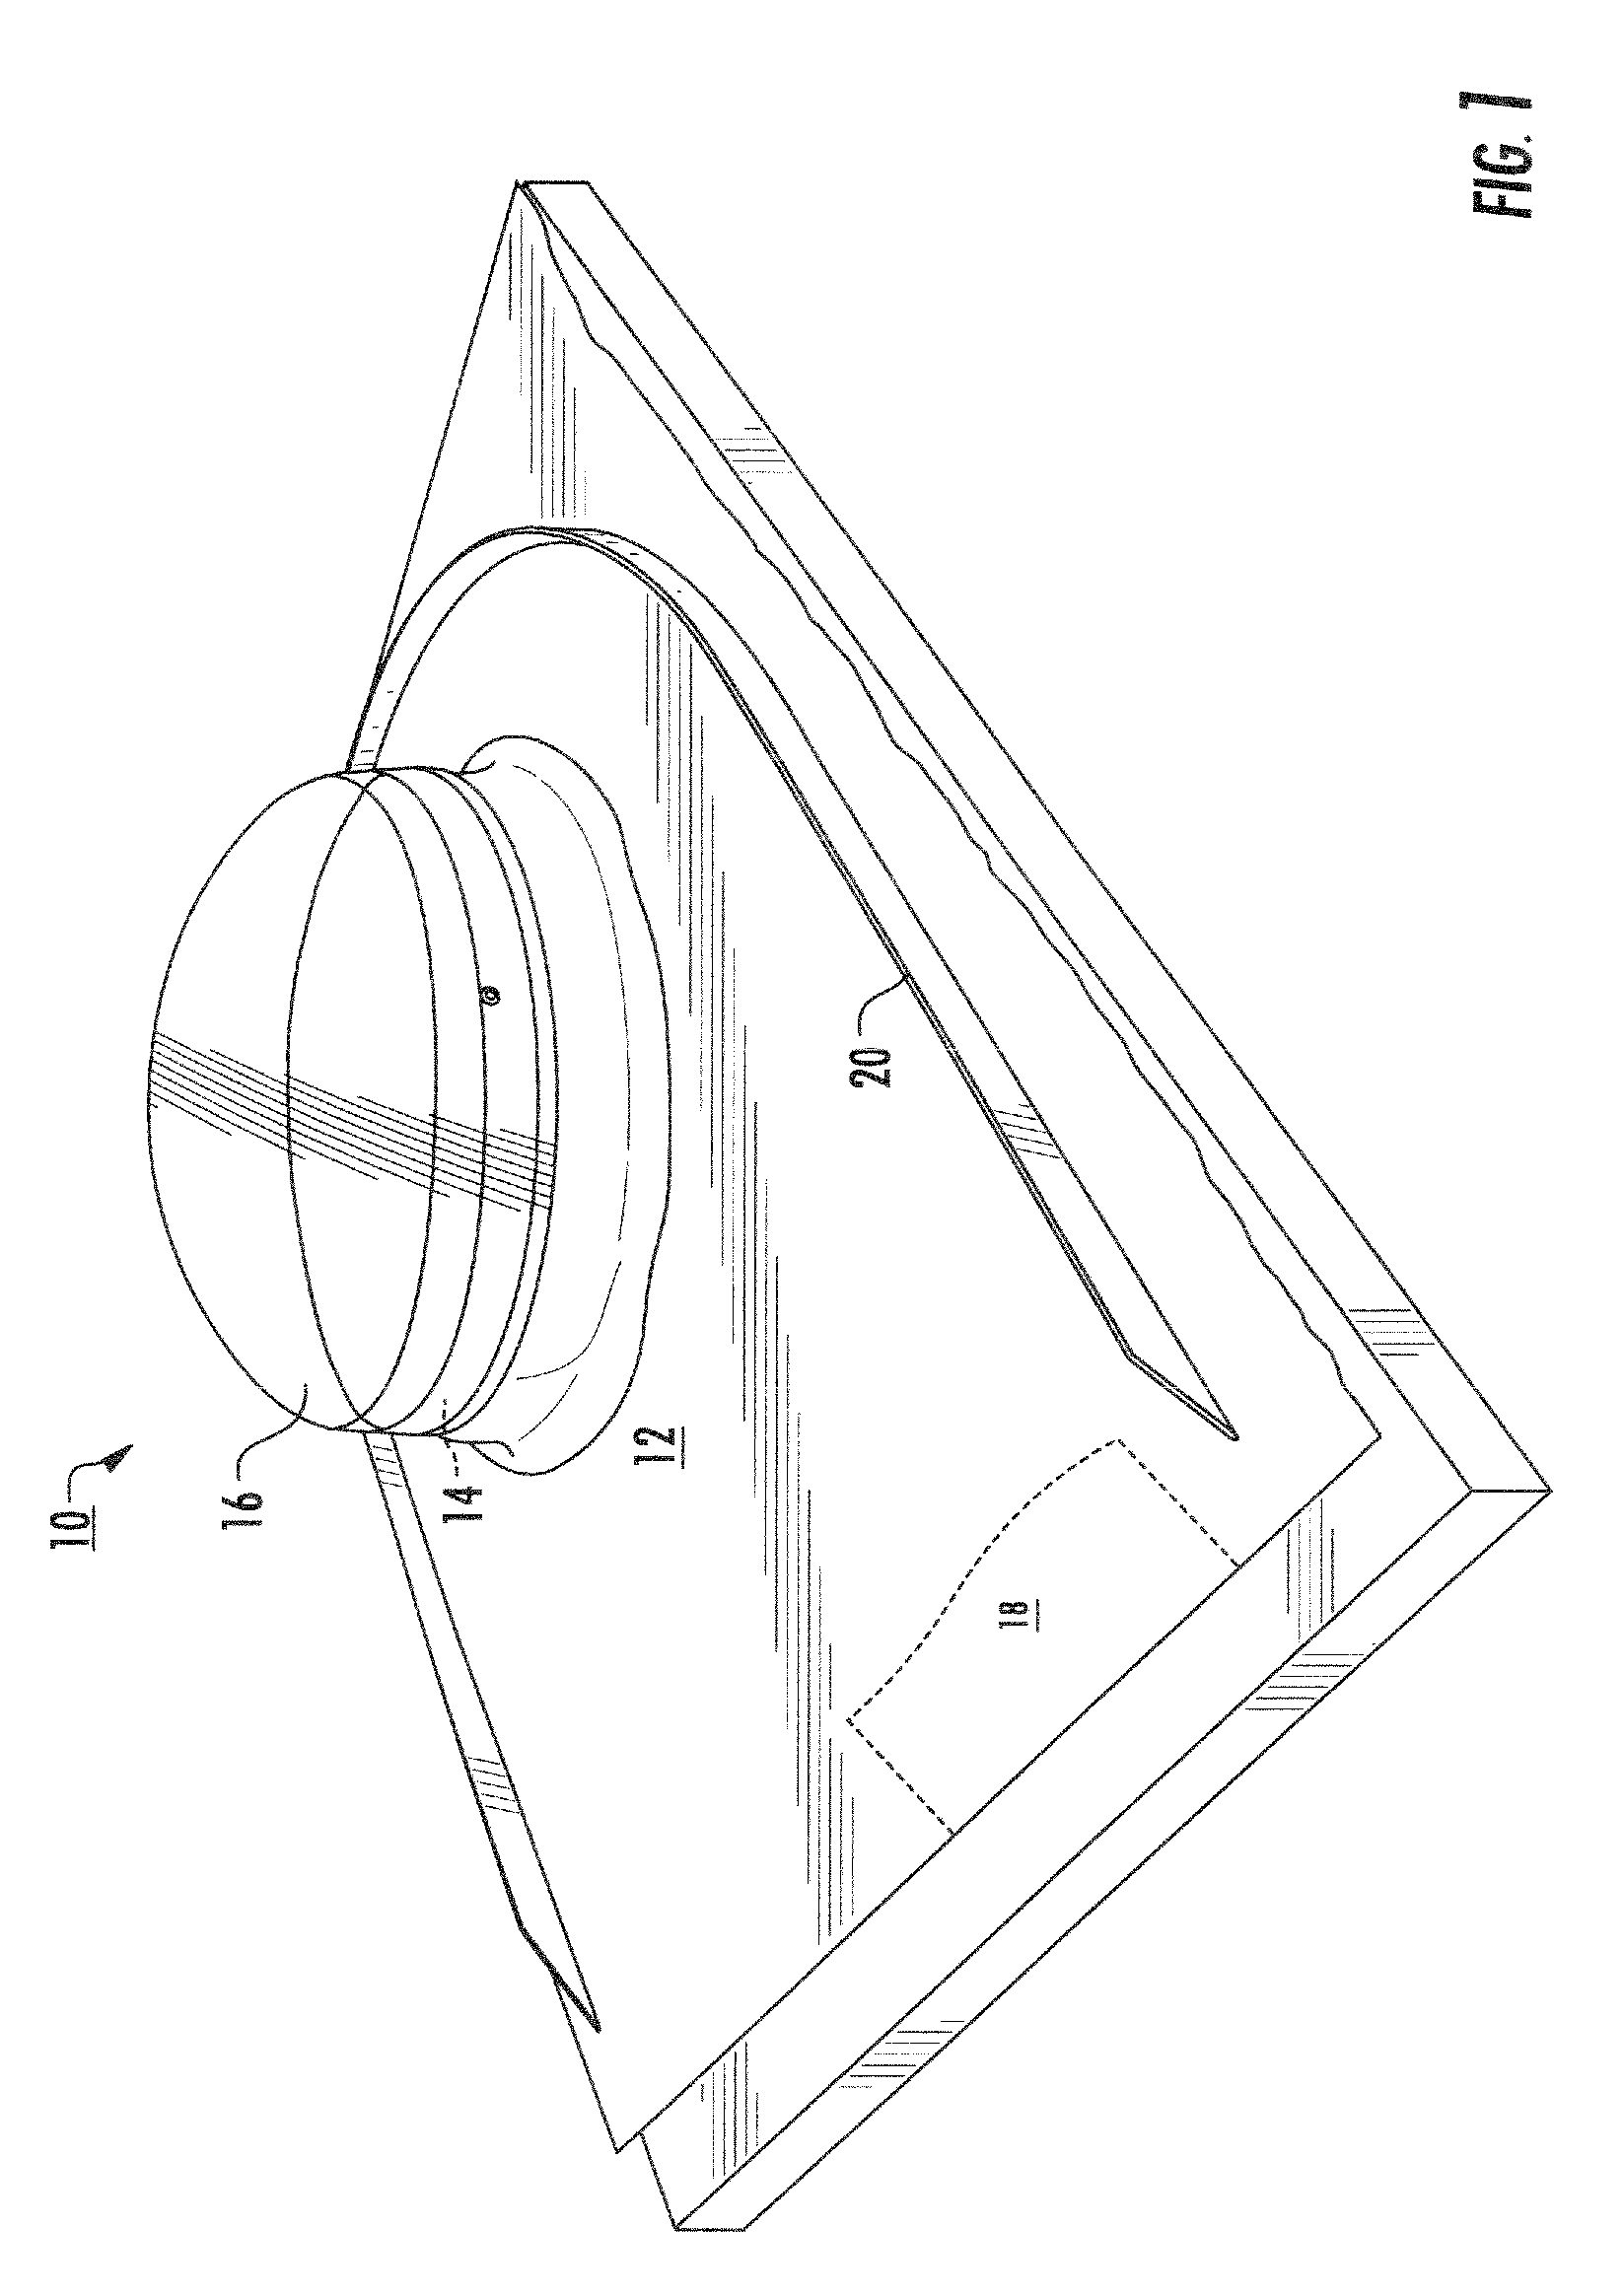 Roofing components having vacuum-formed thermoset materials and related manufacturing methods